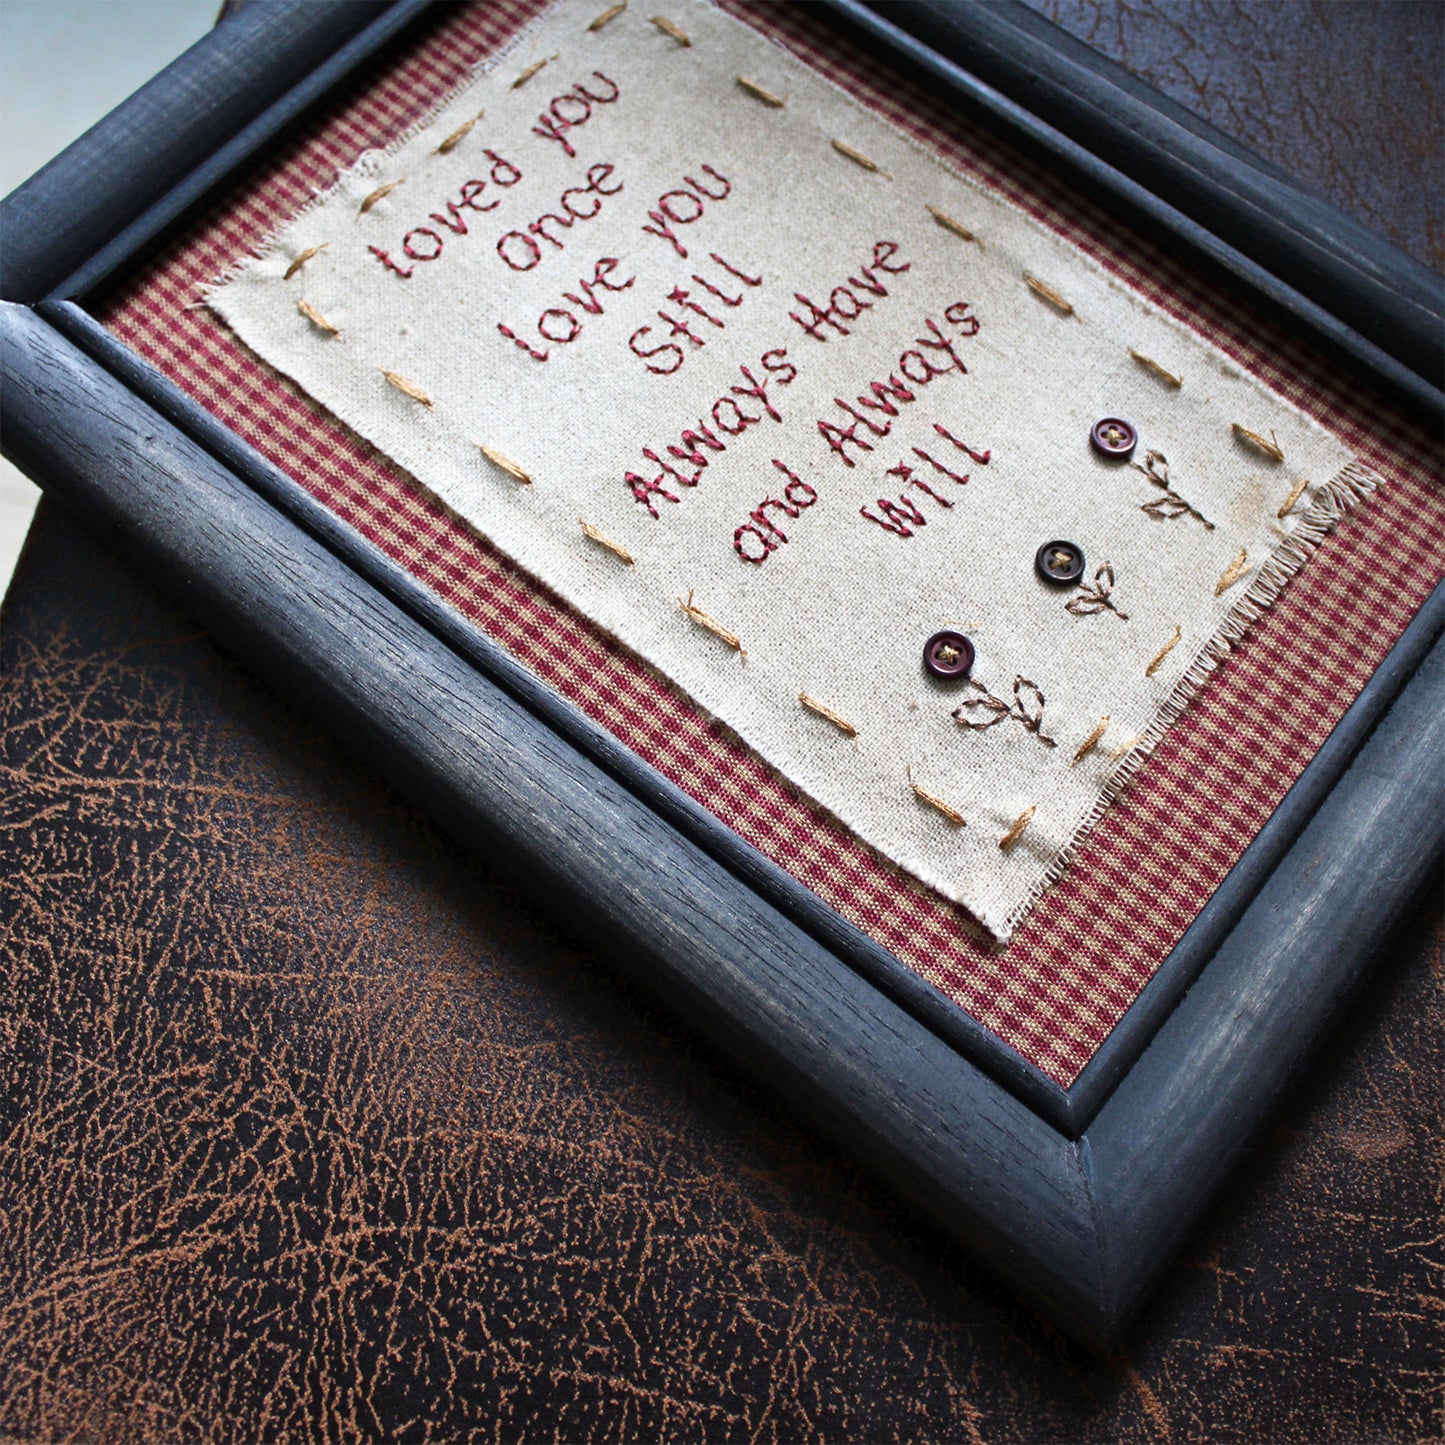 CVHOMEDECO. Primitives Antique Loved You Once, Love You Still, Always Have and Always Will Stitchery Frame Wall Mounted Hanging Decor Art, 8 x 11 Inch